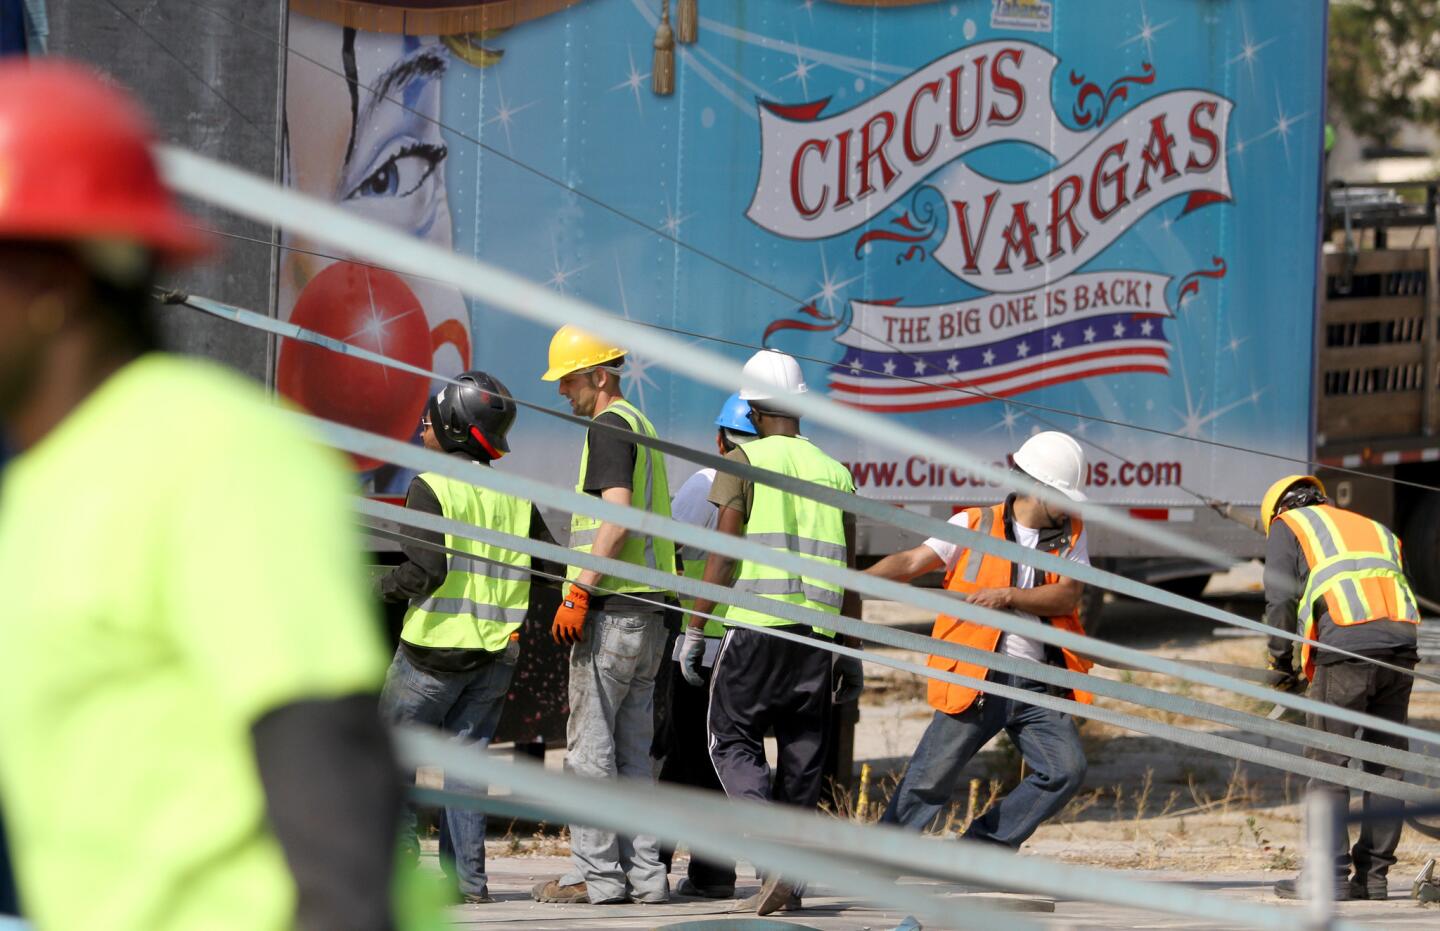 Photo Gallery: Circus Vargas sets up tent in Burbank for two-week show